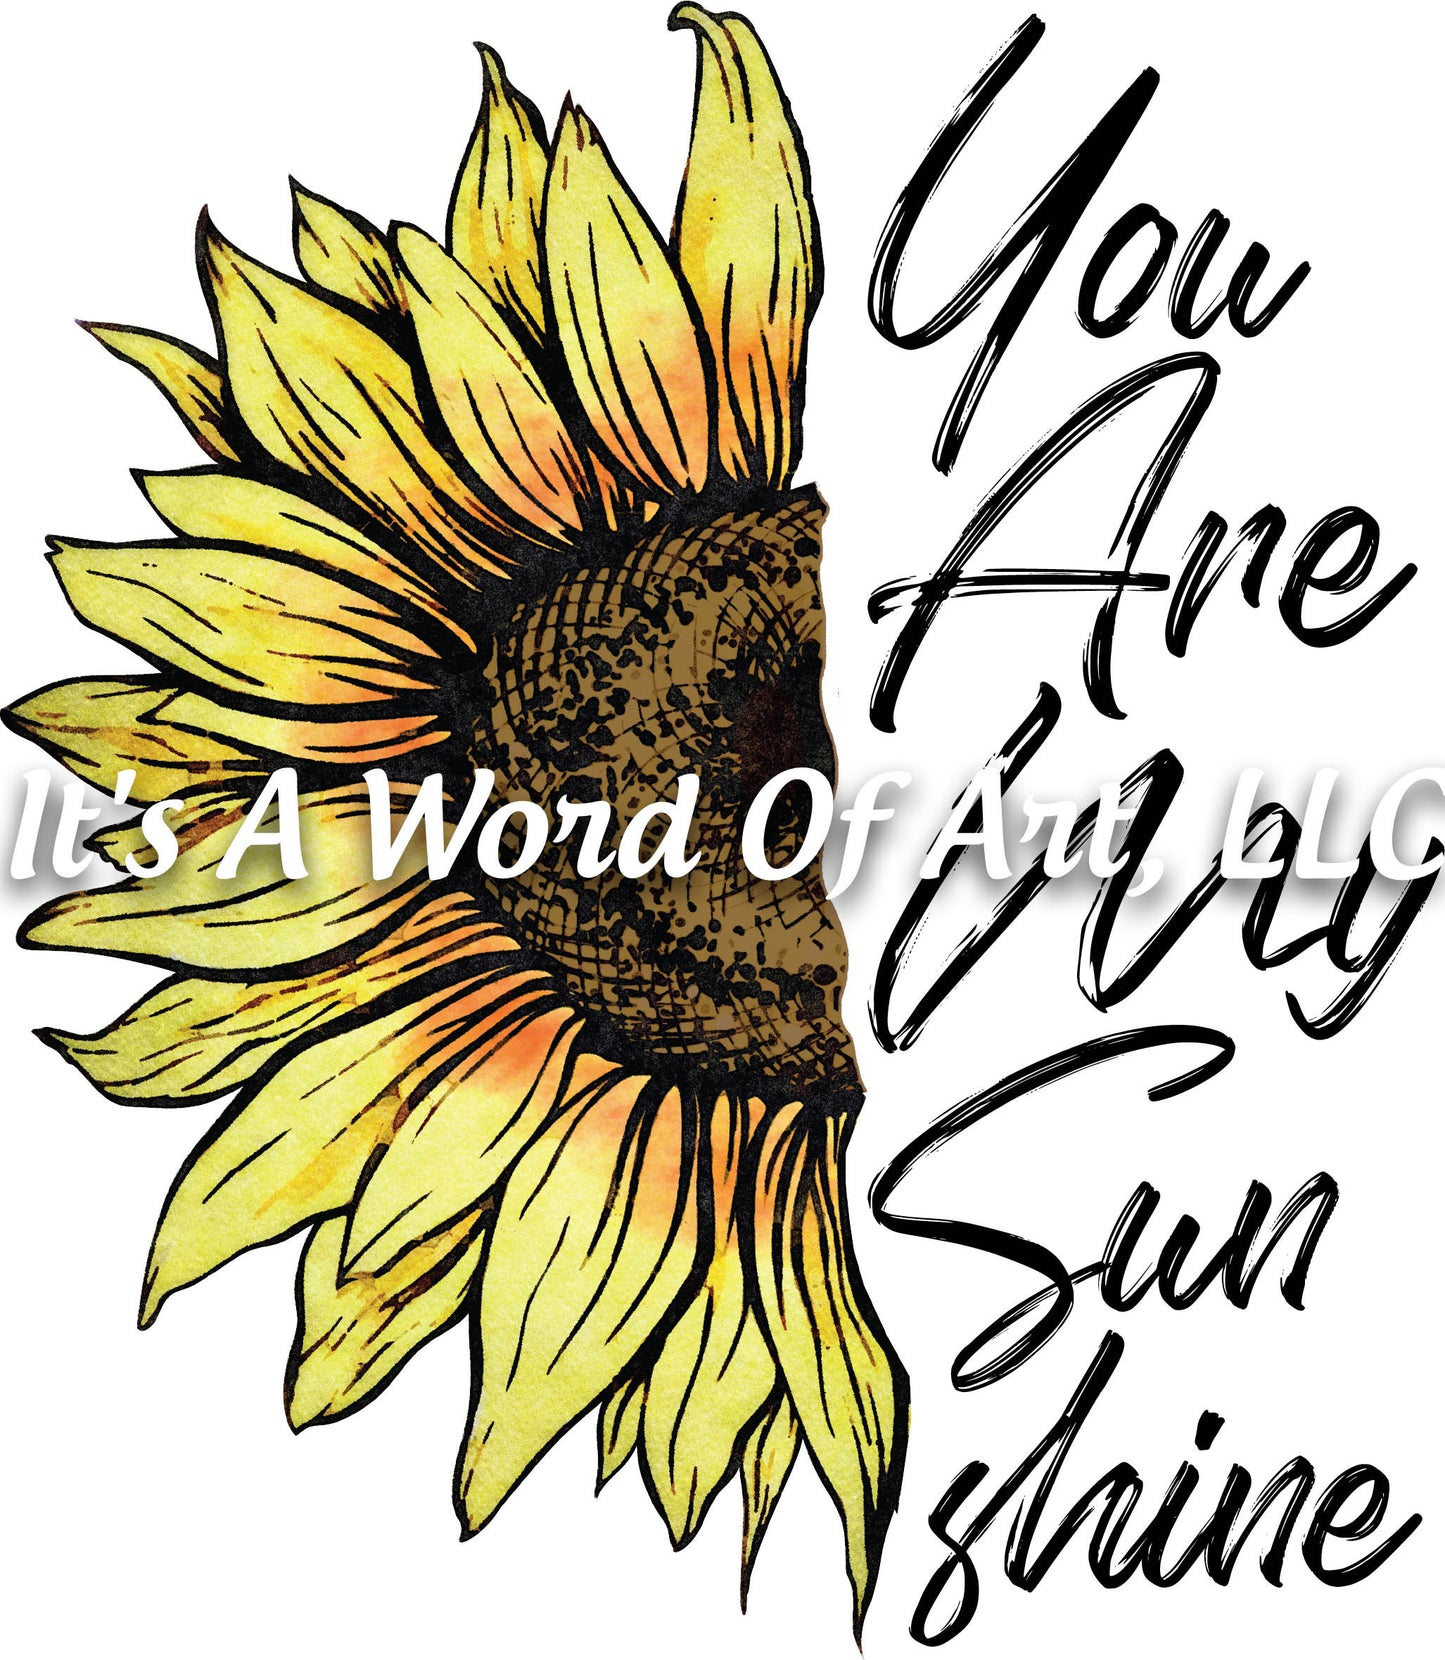 Sunflower 14 - You are my Sunshine Sunflower Sublimation Transfer Set/Ready To Press Sublimation Transfer/Sublimation Transfer